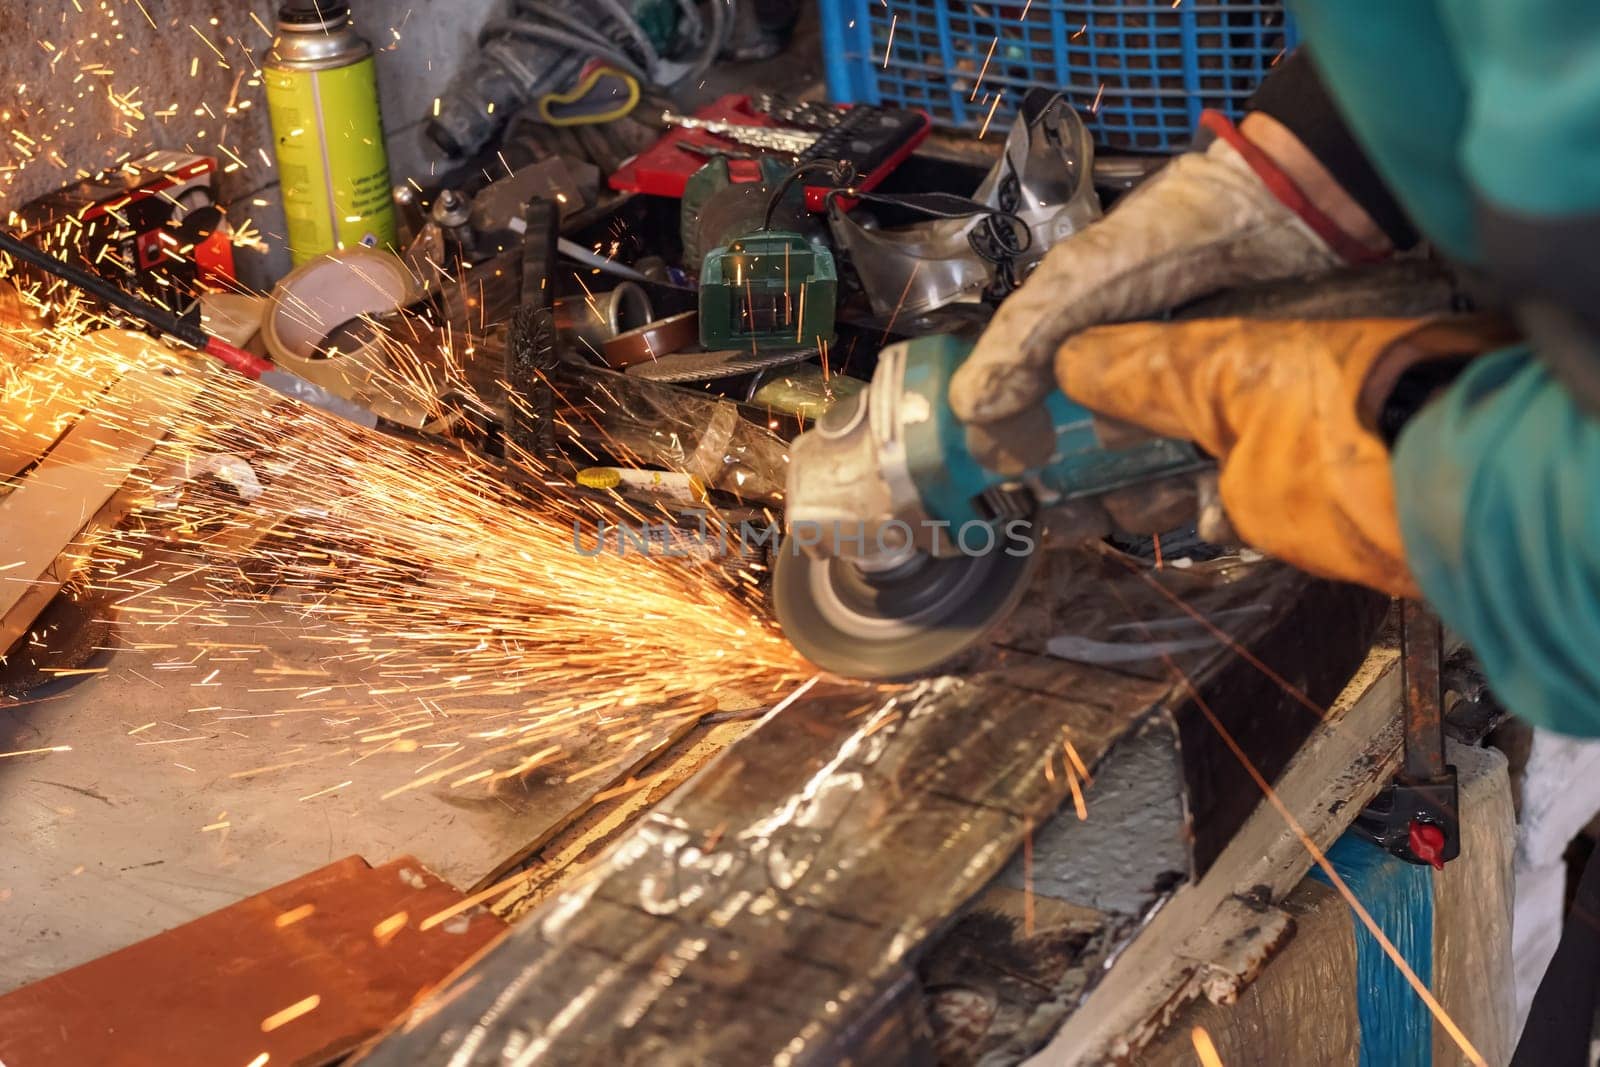 Man working with rotary angle grinder at workshop, closeup detail, orange sparks flying around.